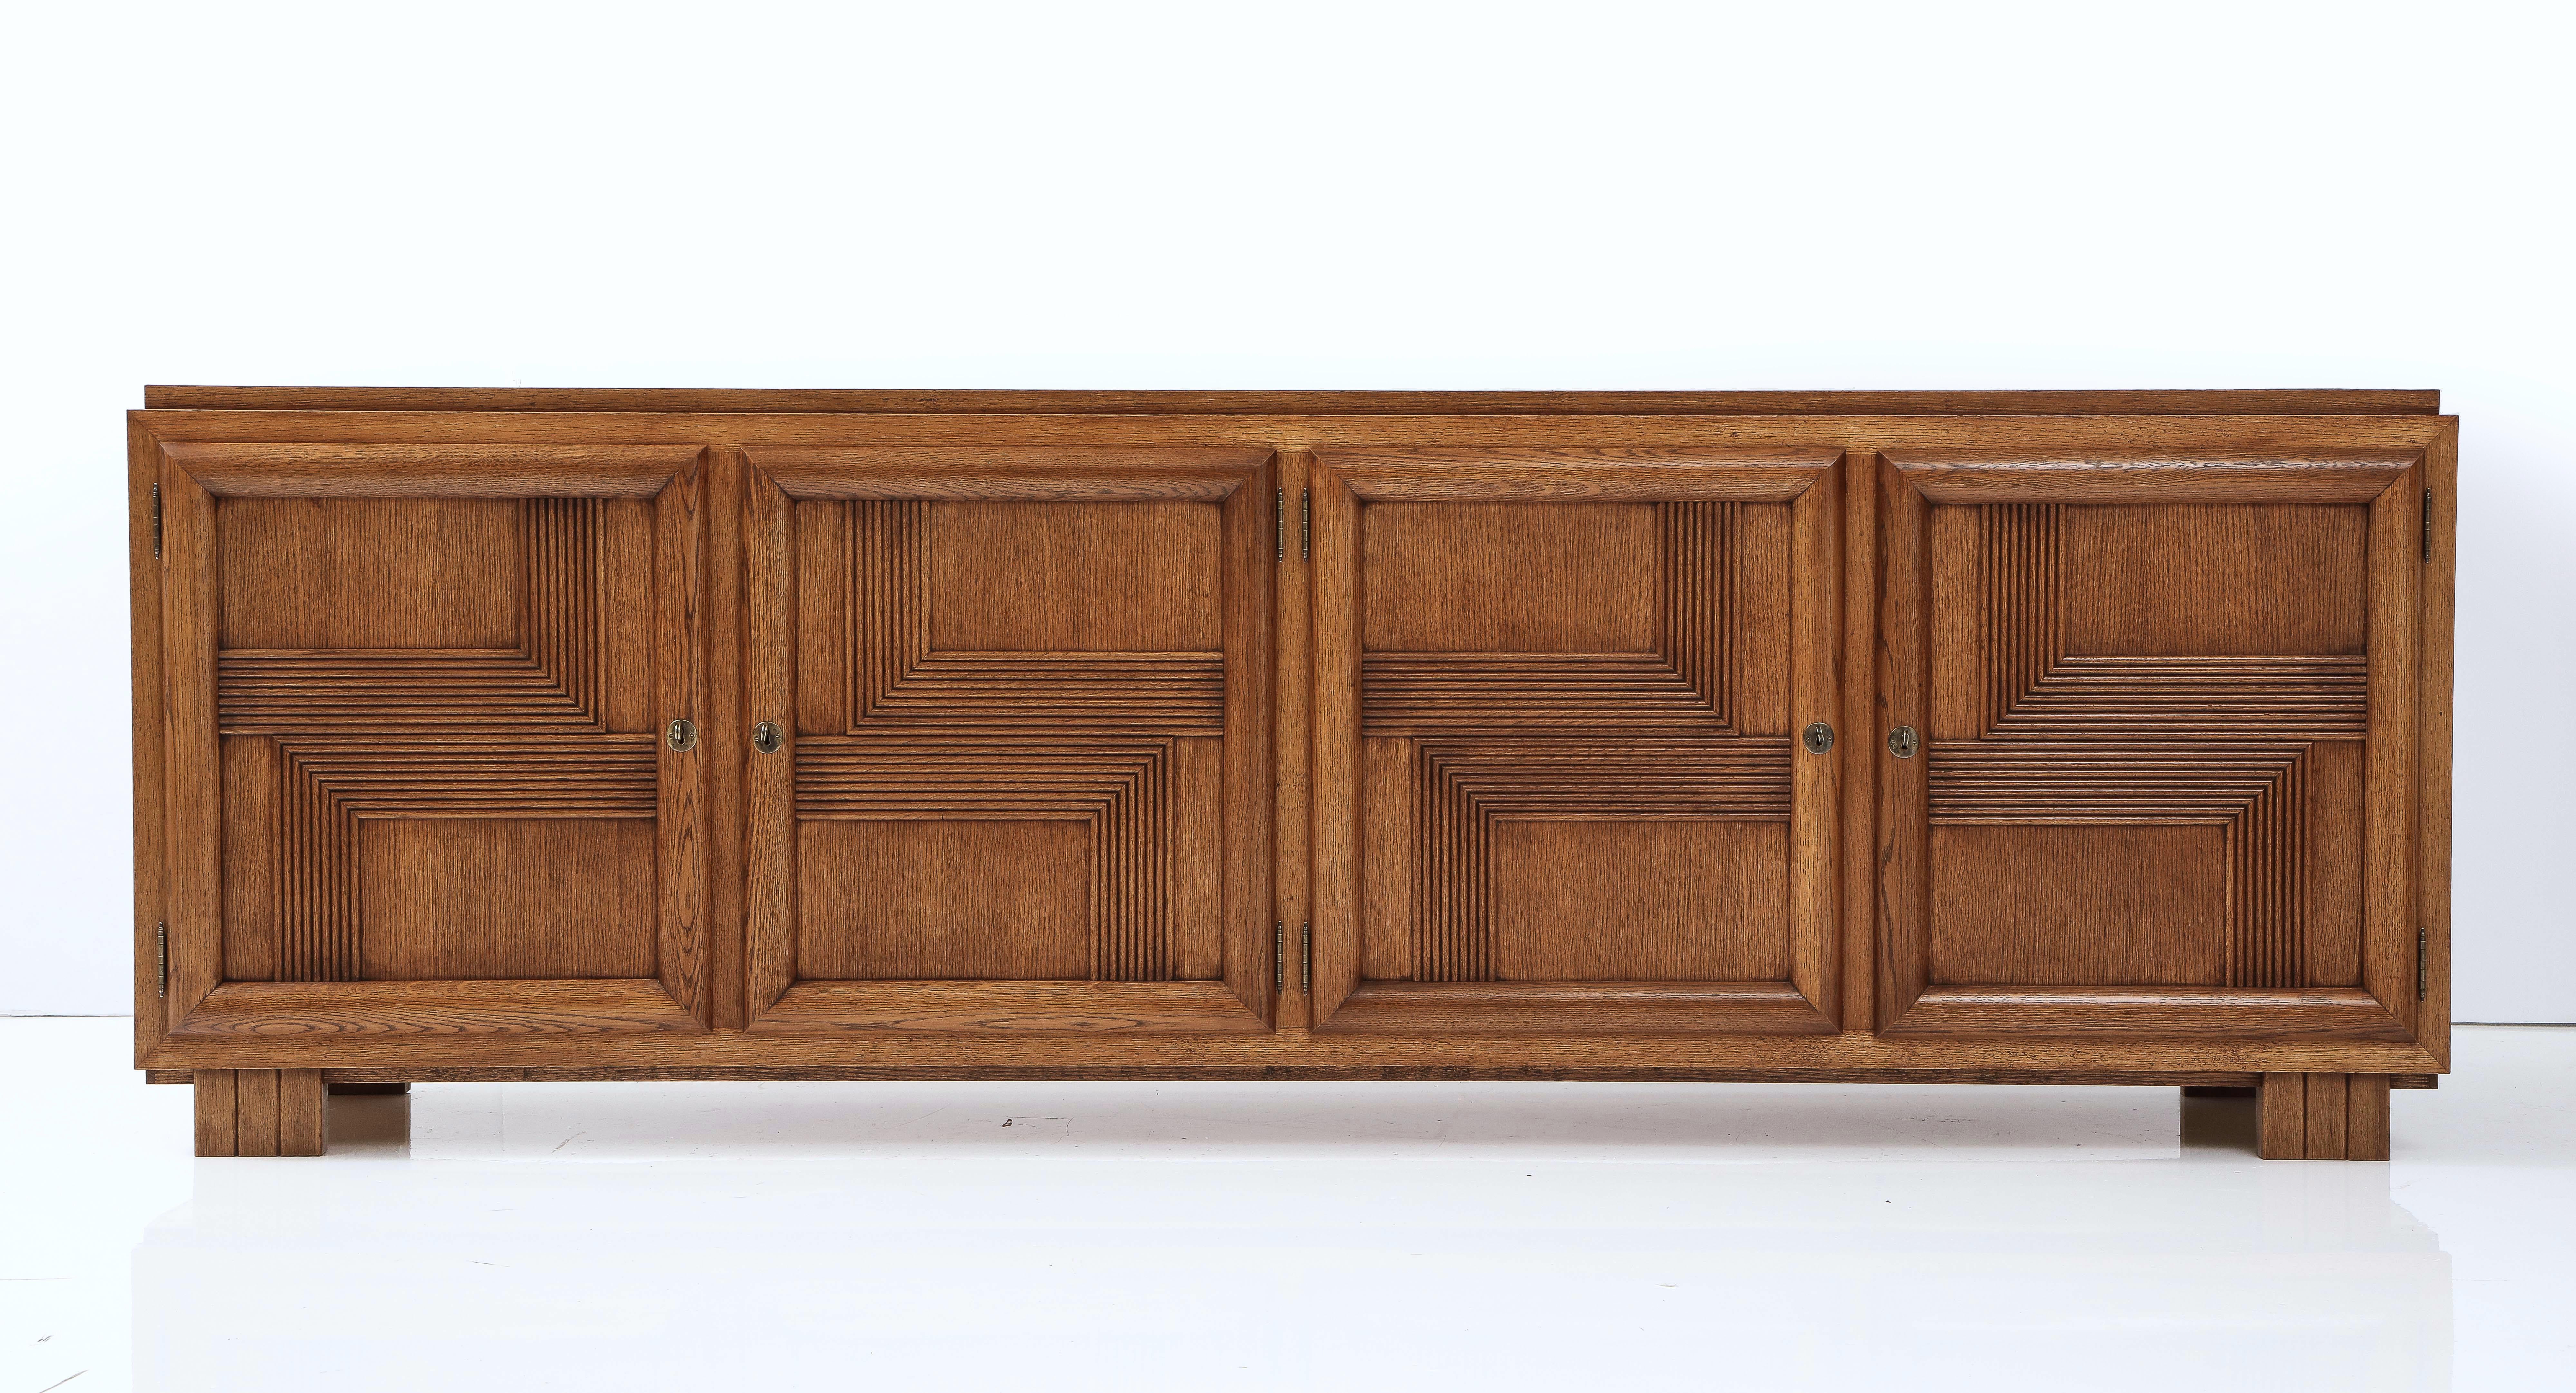 Hand-Crafted 'Fredrik' Made to Order Solid Oak Handcrafted Sideboard For Sale